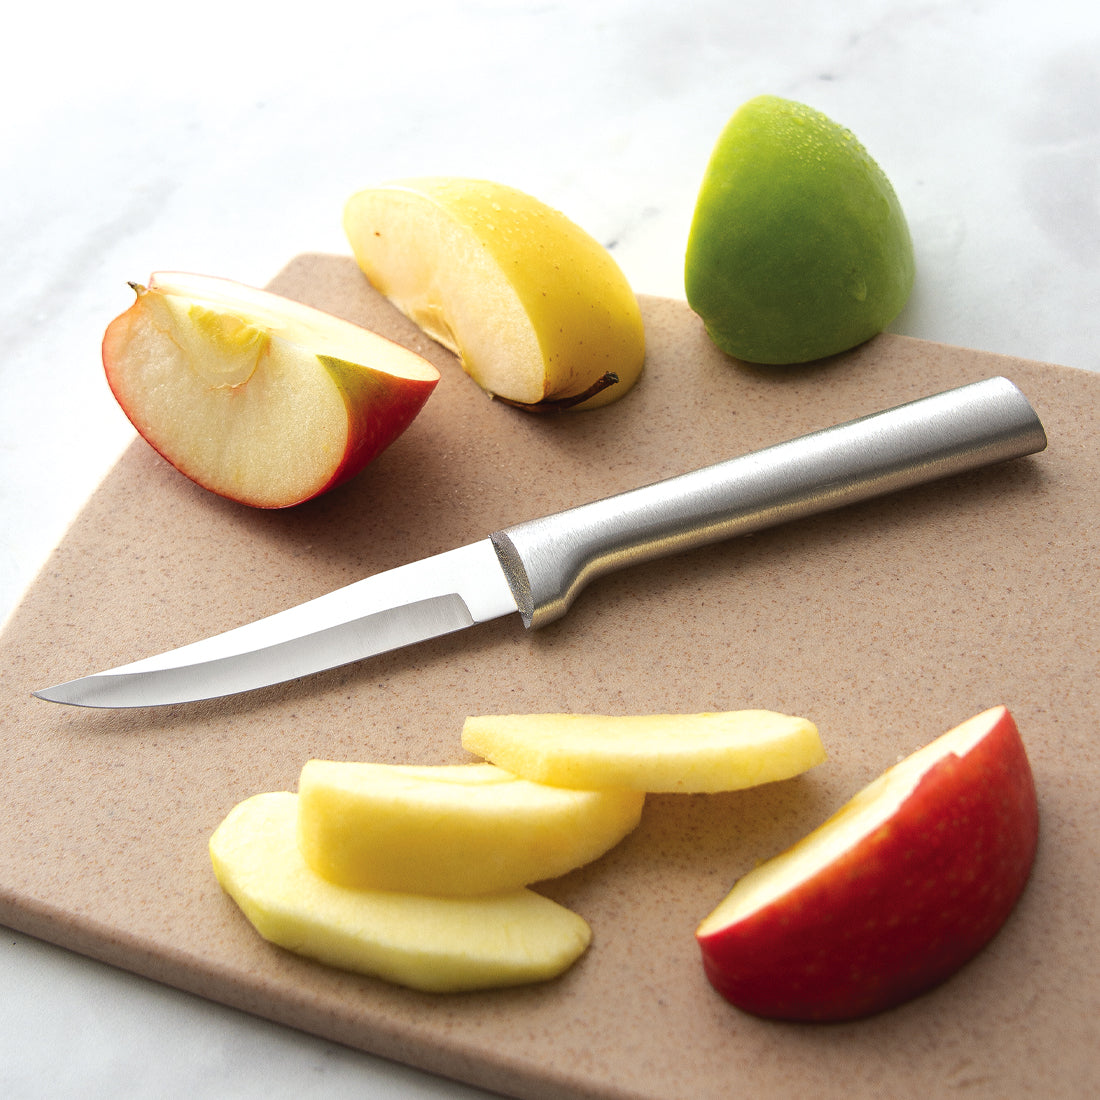 A Heavy Duty Paring knife next to sliced apples.